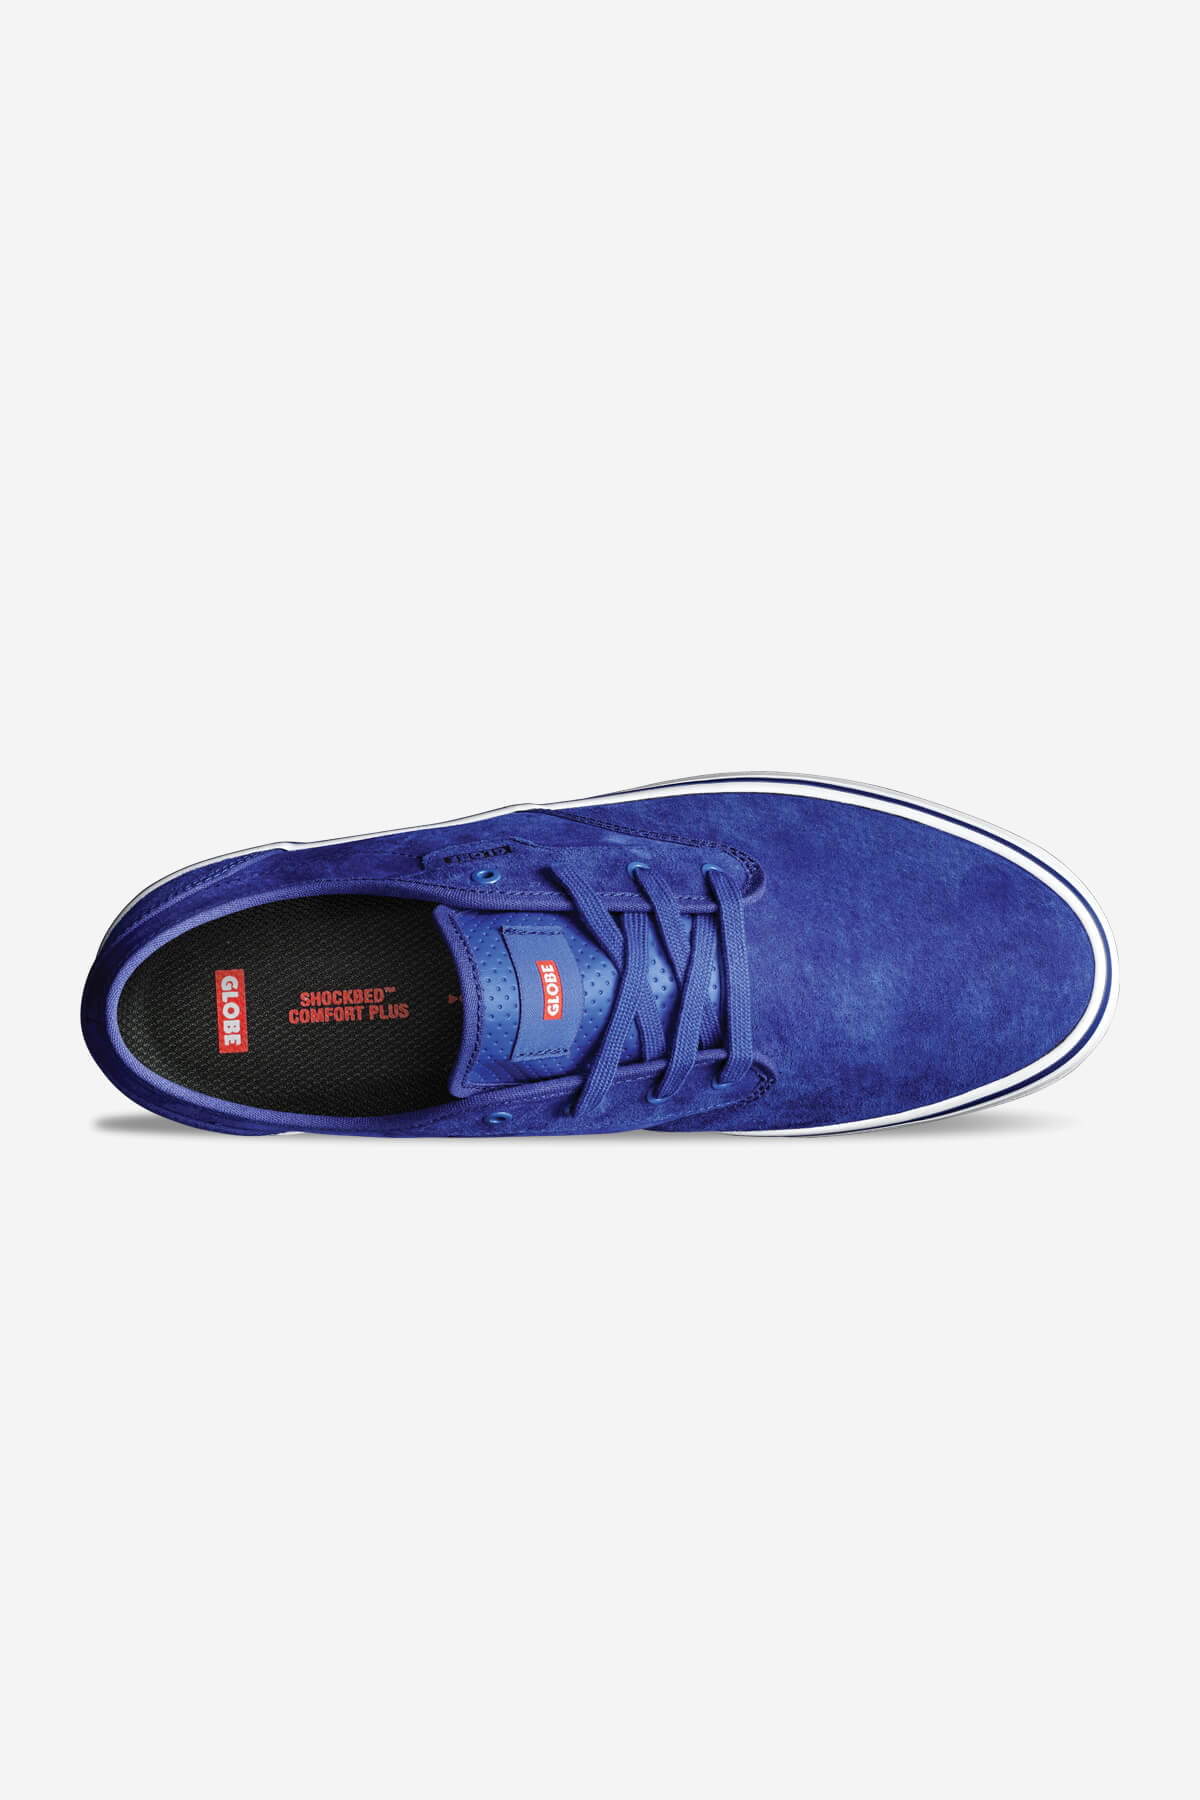 Globe Low shoes Motley II skate shoes in Royal Blue/White